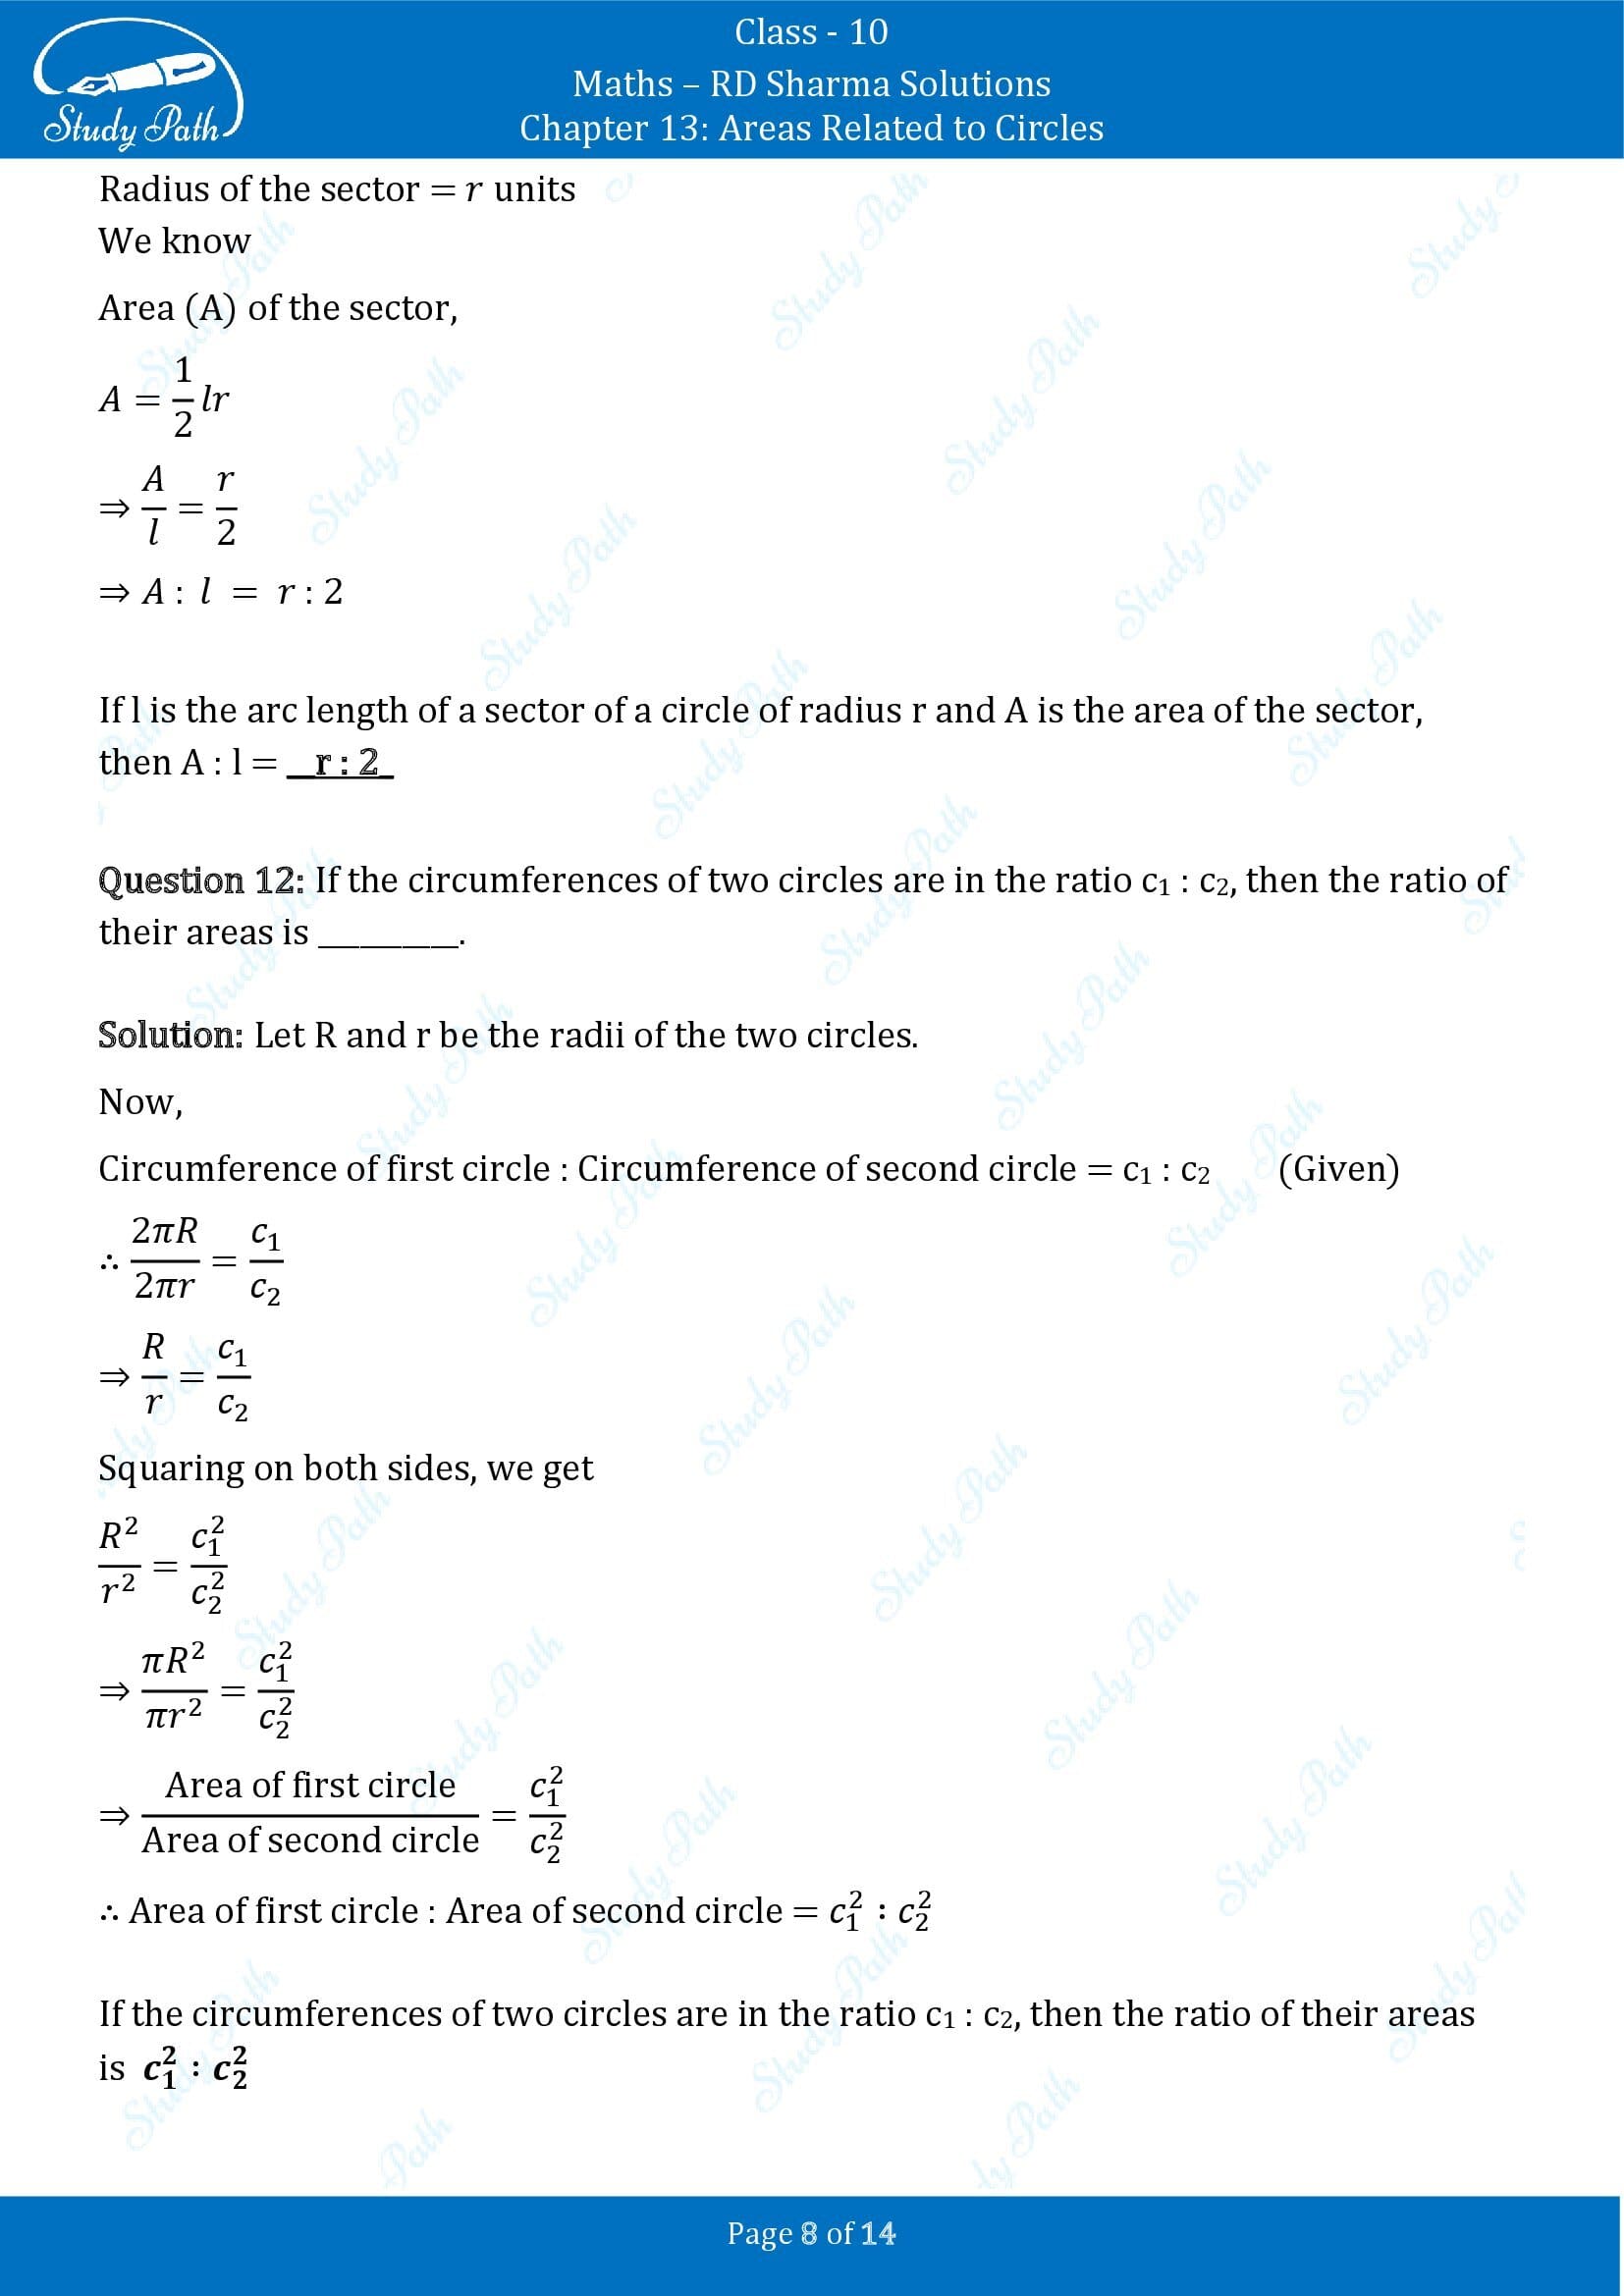 RD Sharma Solutions Class 10 Chapter 13 Areas Related to Circles Fill in the Blank Type Questions FBQs 00008